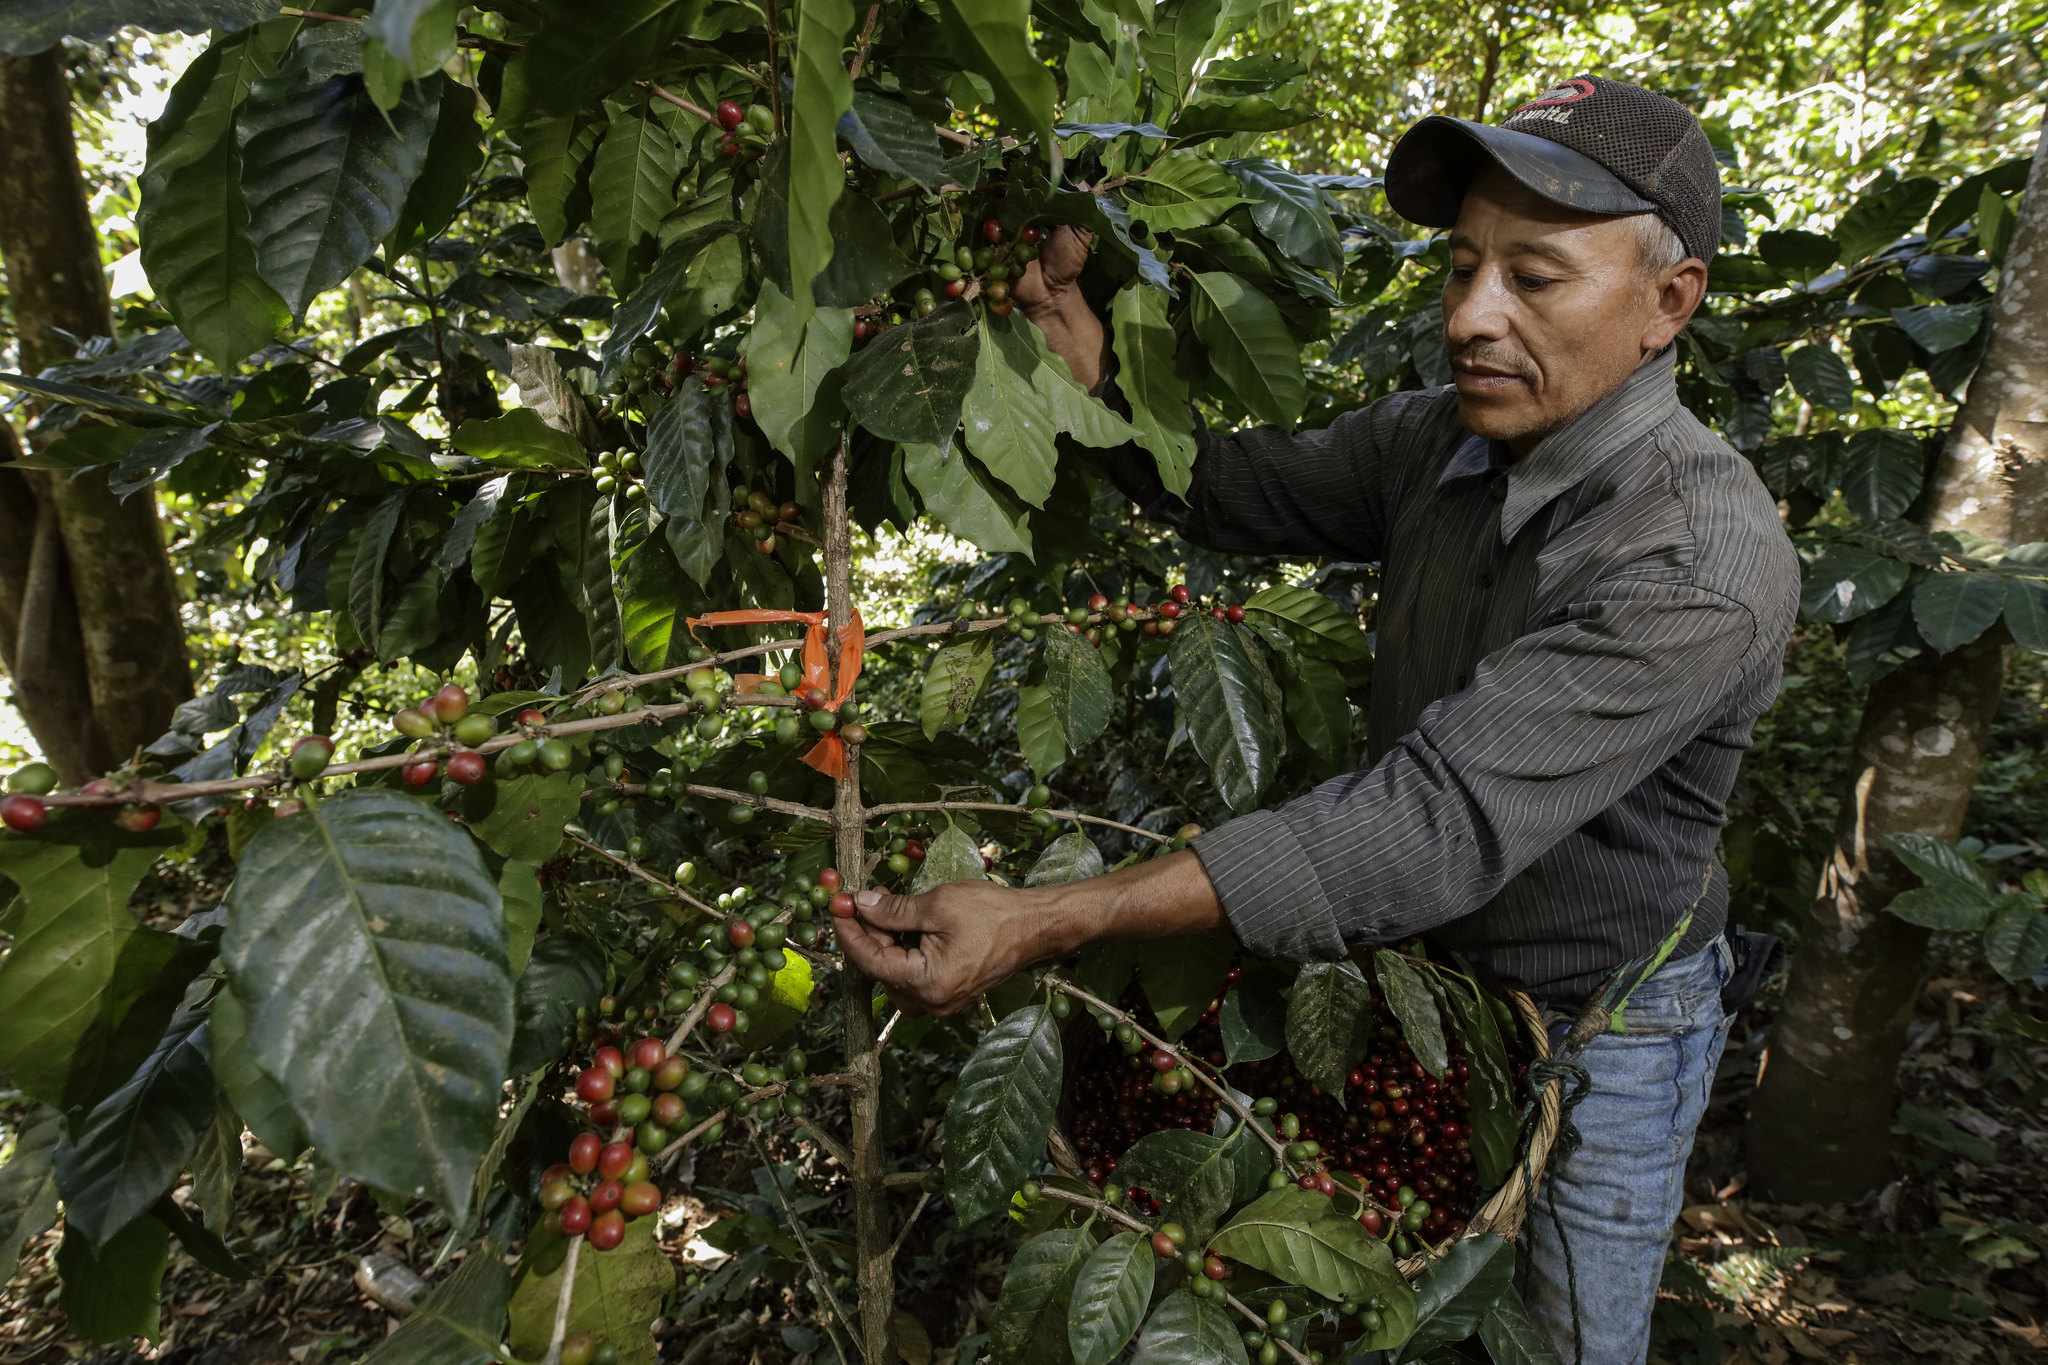 <p>A coffee farmer in La Concepción, in the western department of Ahuachapán, El Salvador. Coffee production is important for the Salvadoran economy, but extreme weather events such as droughts and floods have impacted output in recent years. (Image: <a href="https://www.flickr.com/photos/27781737@N05/40523677681/">Maren Barbee</a>, <a href="https://creativecommons.org/licenses/by/2.0/">CC BY</a>)</p>